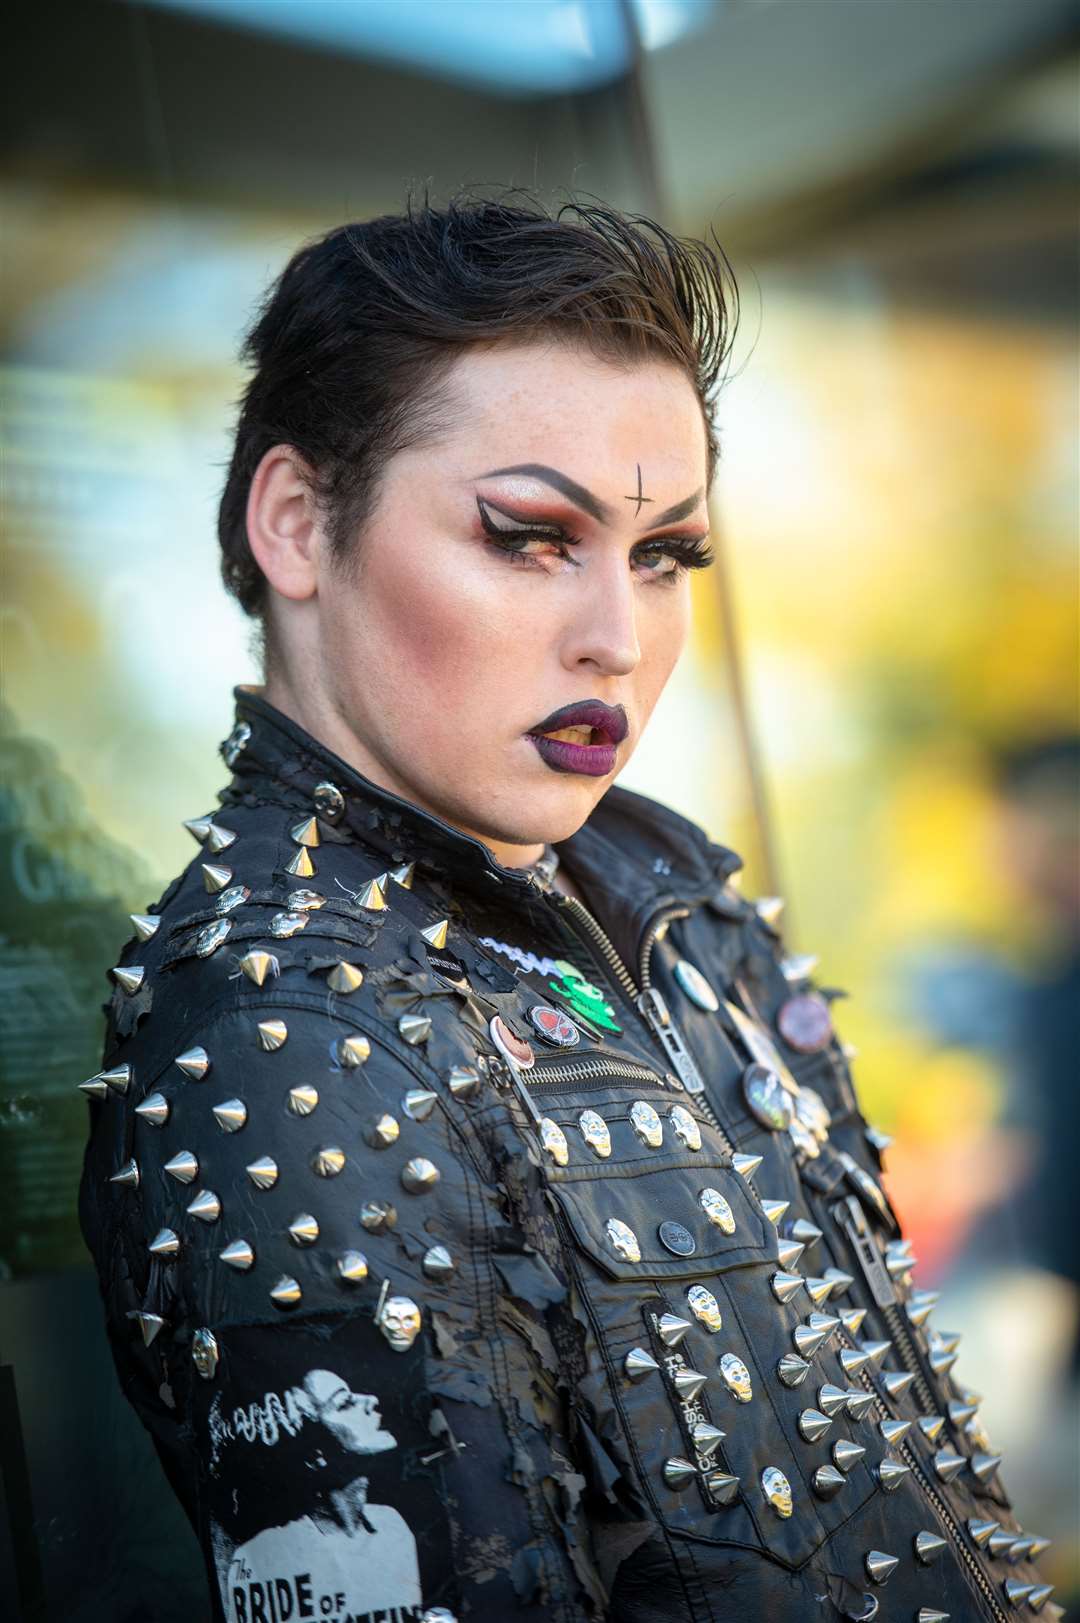 ProudNess LGBT March at Inverness drag make-up expert Scott Sweeney. Picture: Callum Mackay